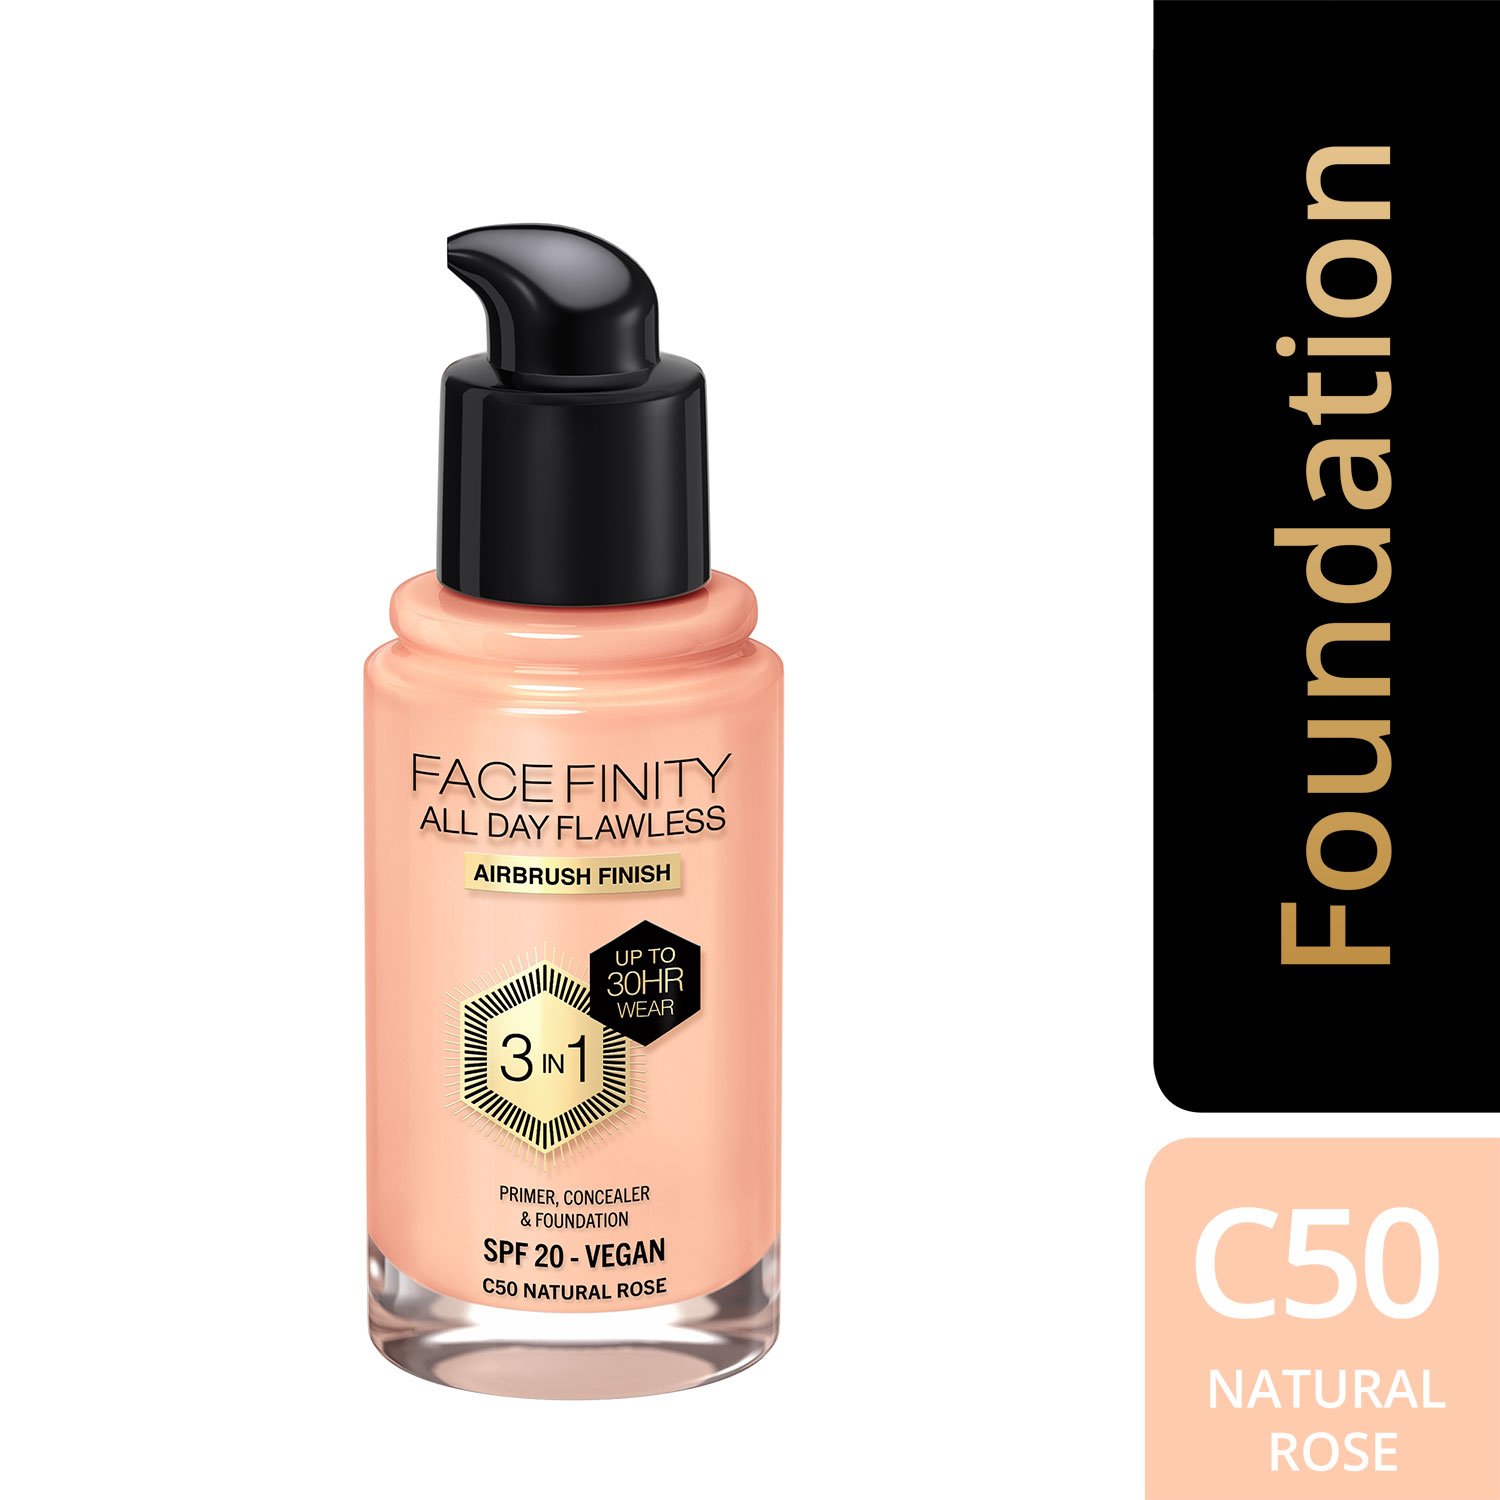 Тональная основа Max Factor Facefinity All Day Flawless 3 in 1 New тон C50 (Natural Rose) 30 мл - фото 3